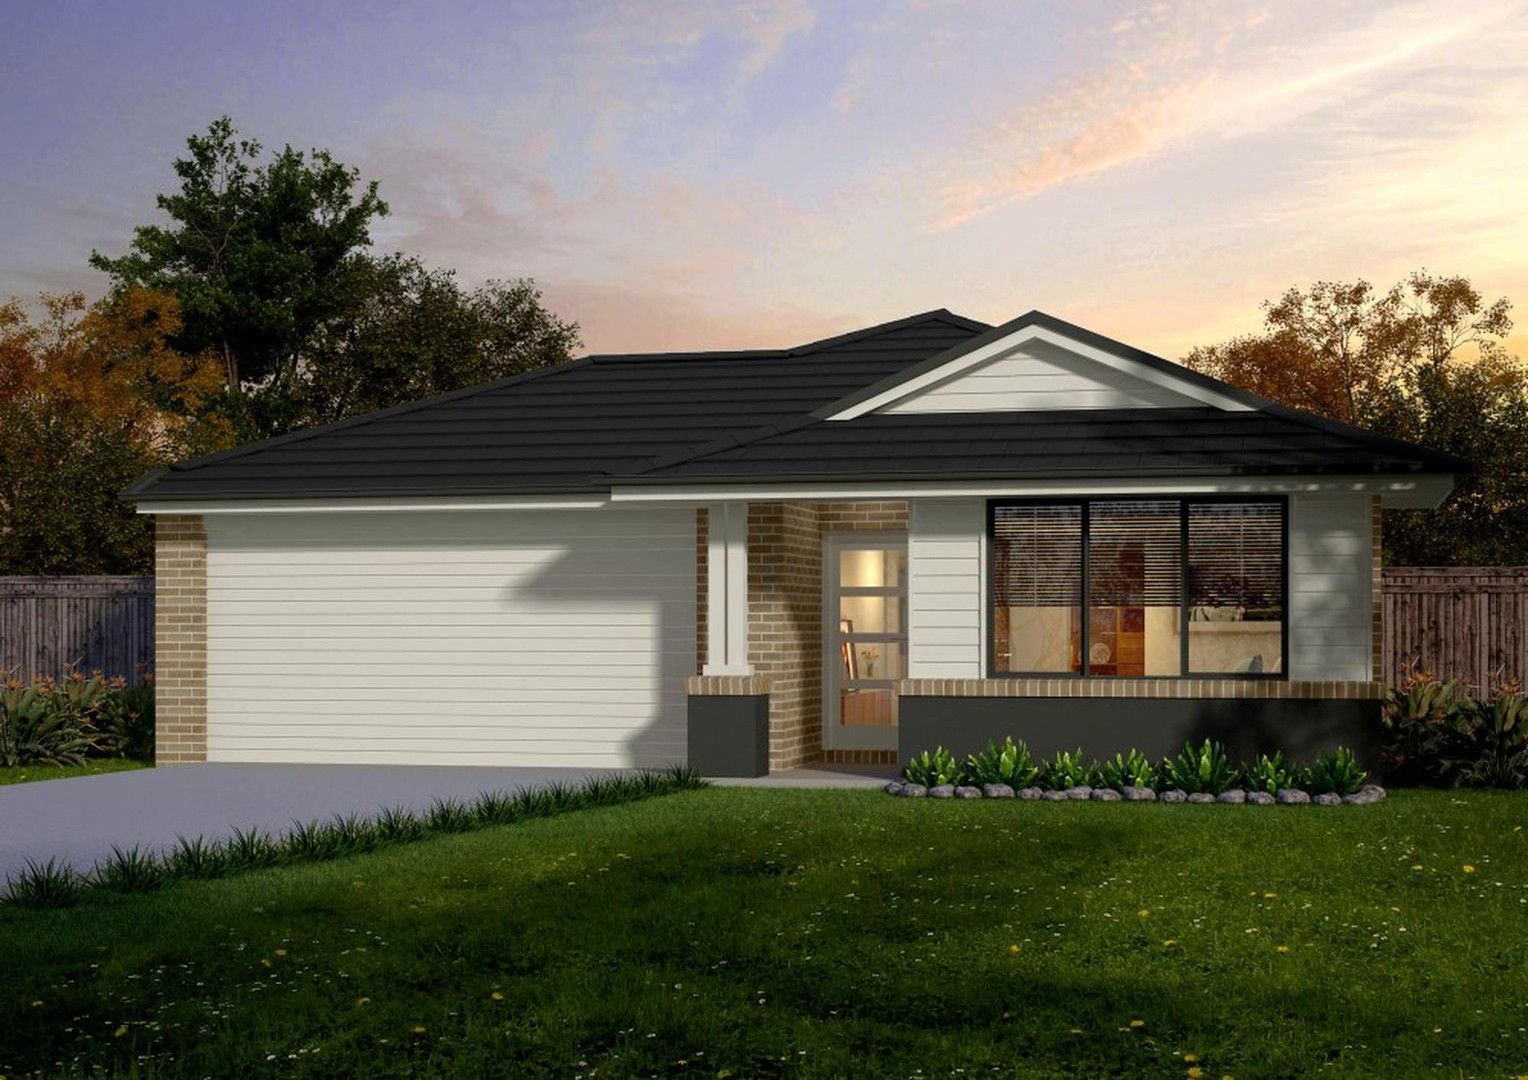 4 bedrooms New House & Land in 4009 Carter Road GAWLER EAST SA, 5118